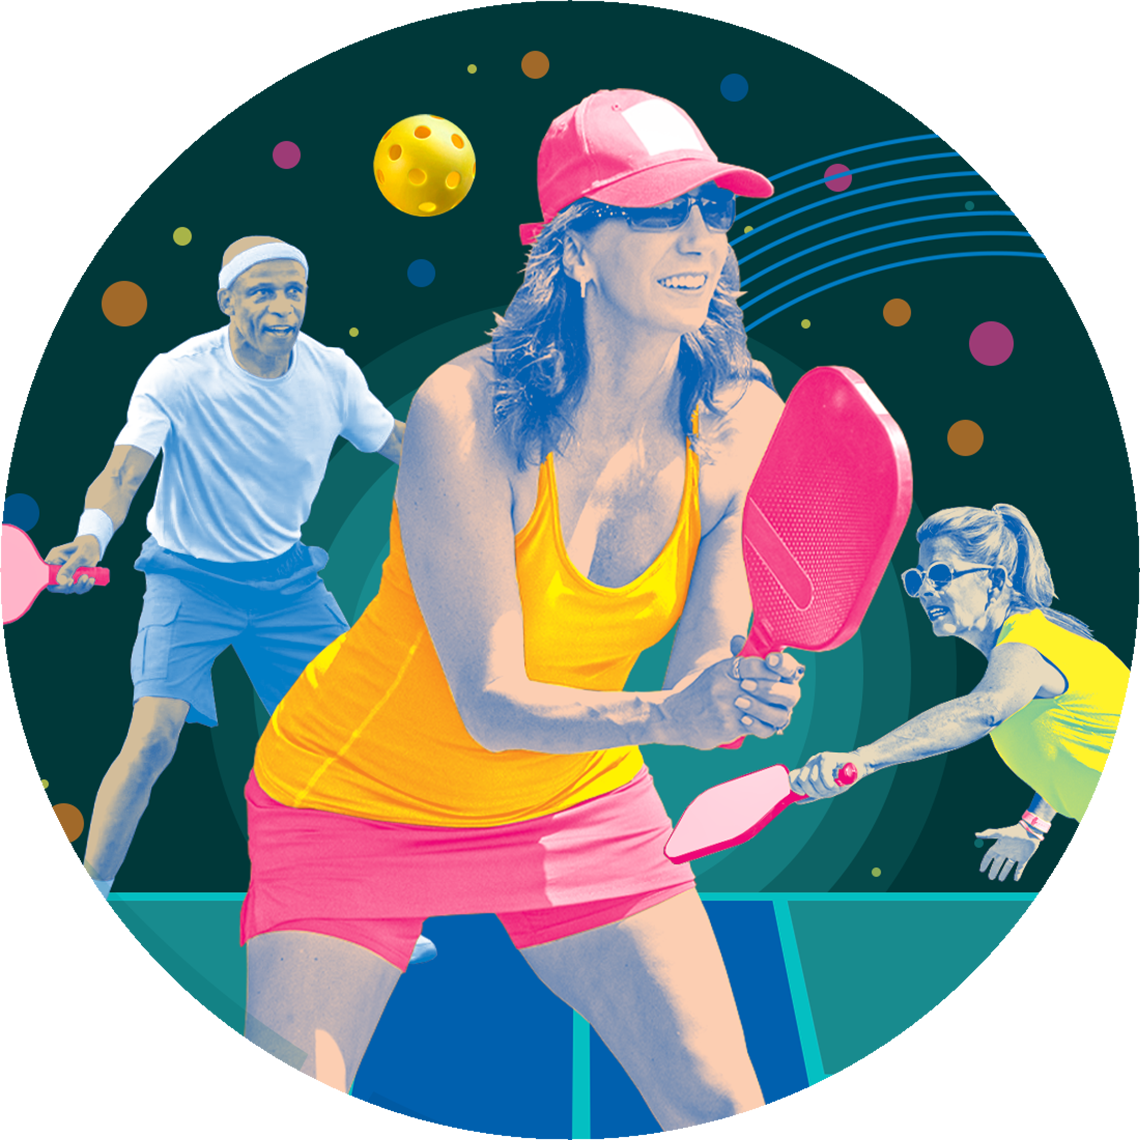 woman holding a pickleball paddle on a court along with other players collaged in the background